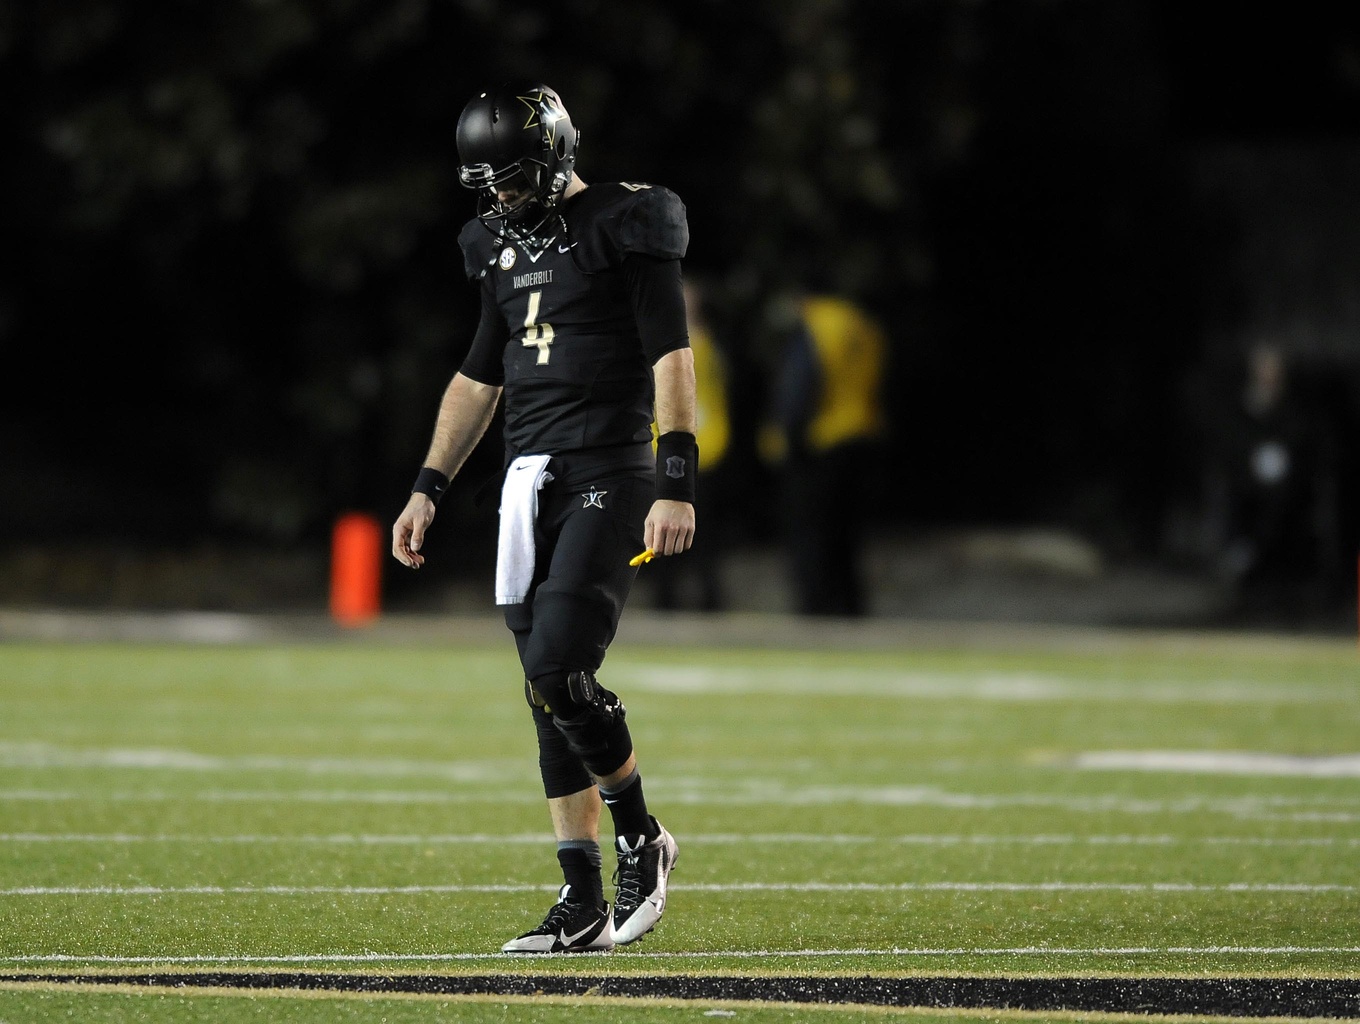 Nov 29, 2014; Nashville, TN, USA; Vanderbilt Commodores quarterback Patton Robinette (4) reacts after a turnover on downs on the last possession of the game against the Tennessee Volunteers at Vanderbilt Stadium. The Volunteers won 24-17. Mandatory Credit: Christopher Hanewinckel-USA TODAY Sports